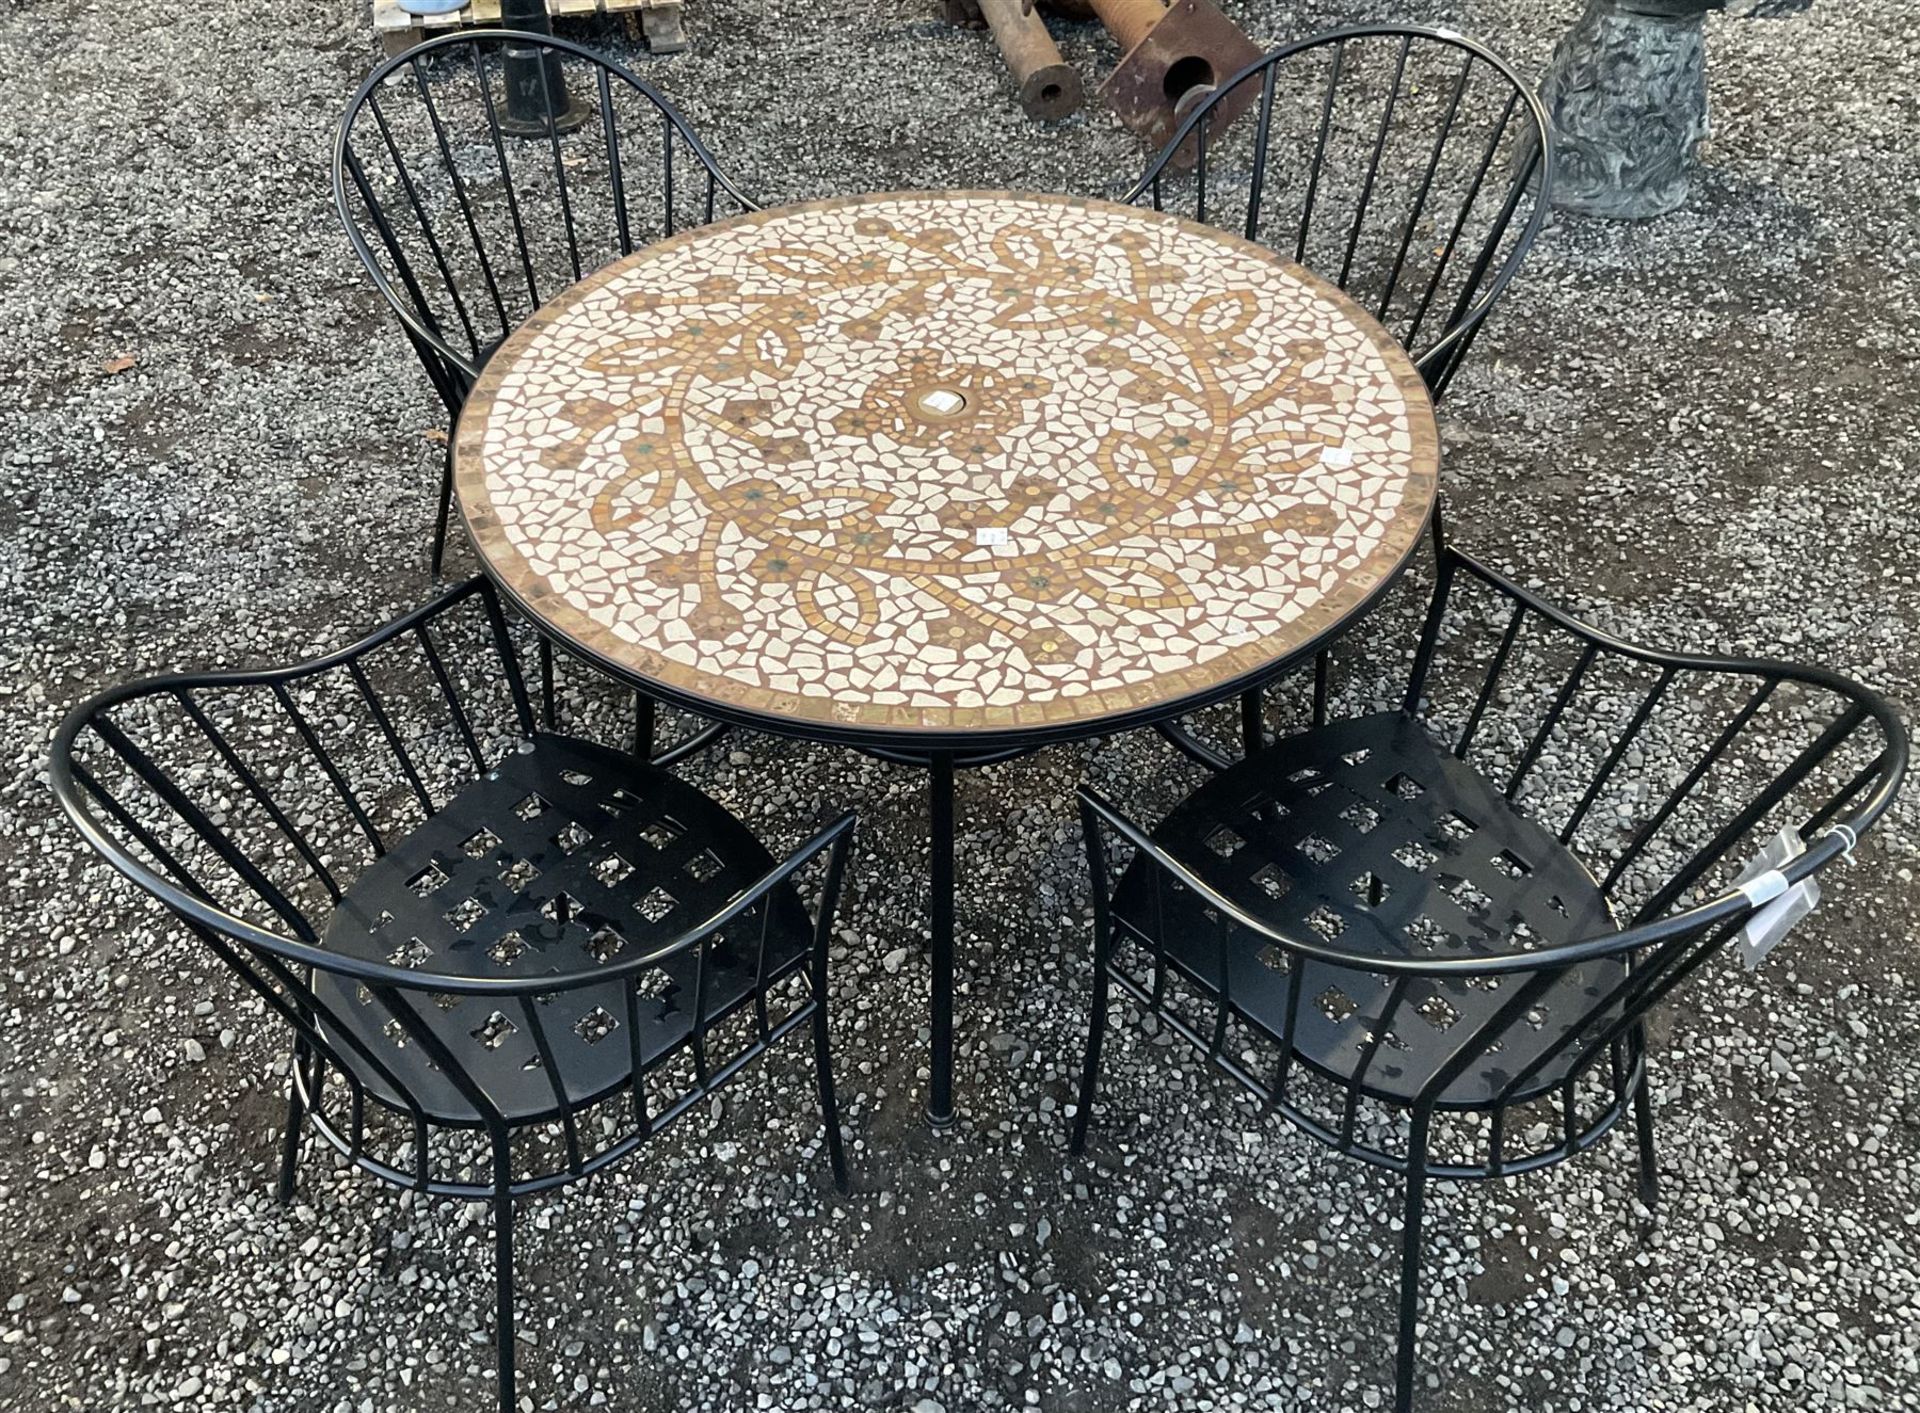 Circular metal framed garden table with mosaique top - Image 2 of 2